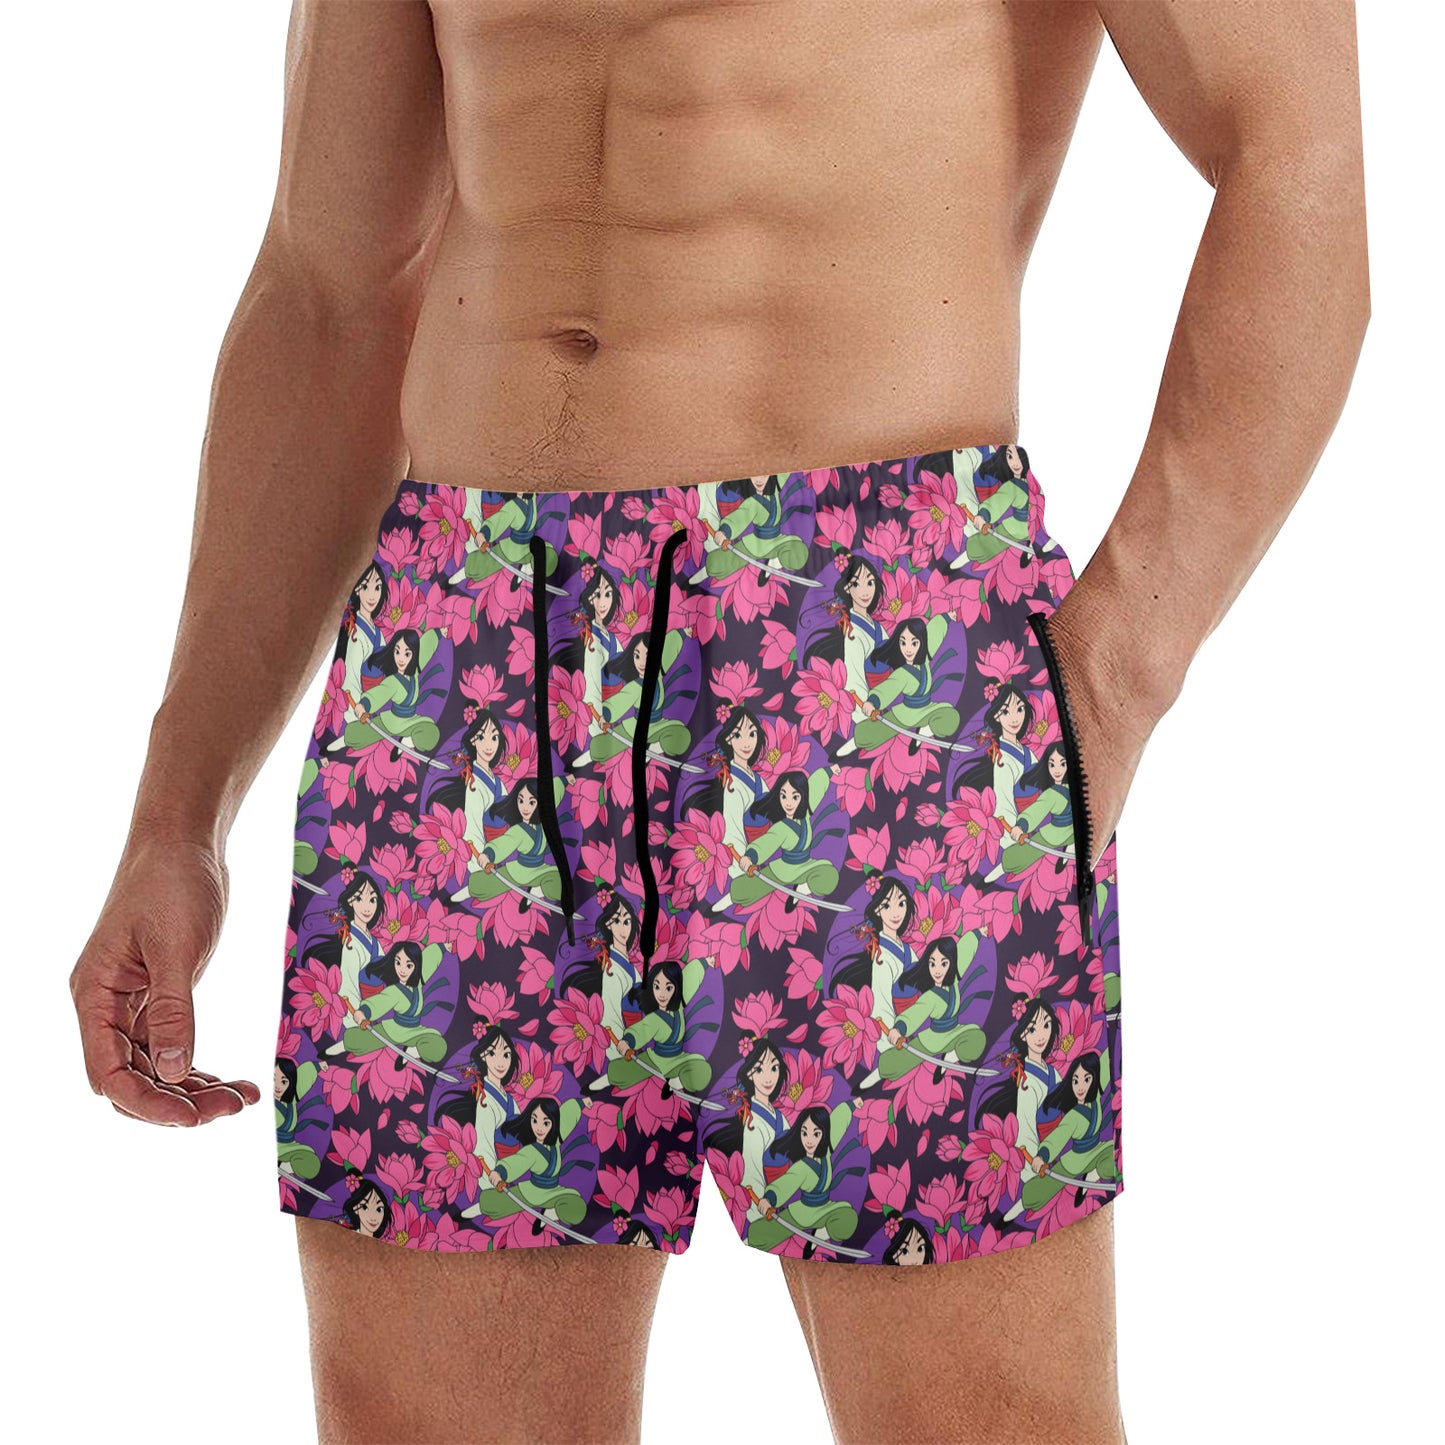 Blooming Flowers Men's Quick Dry Athletic Shorts